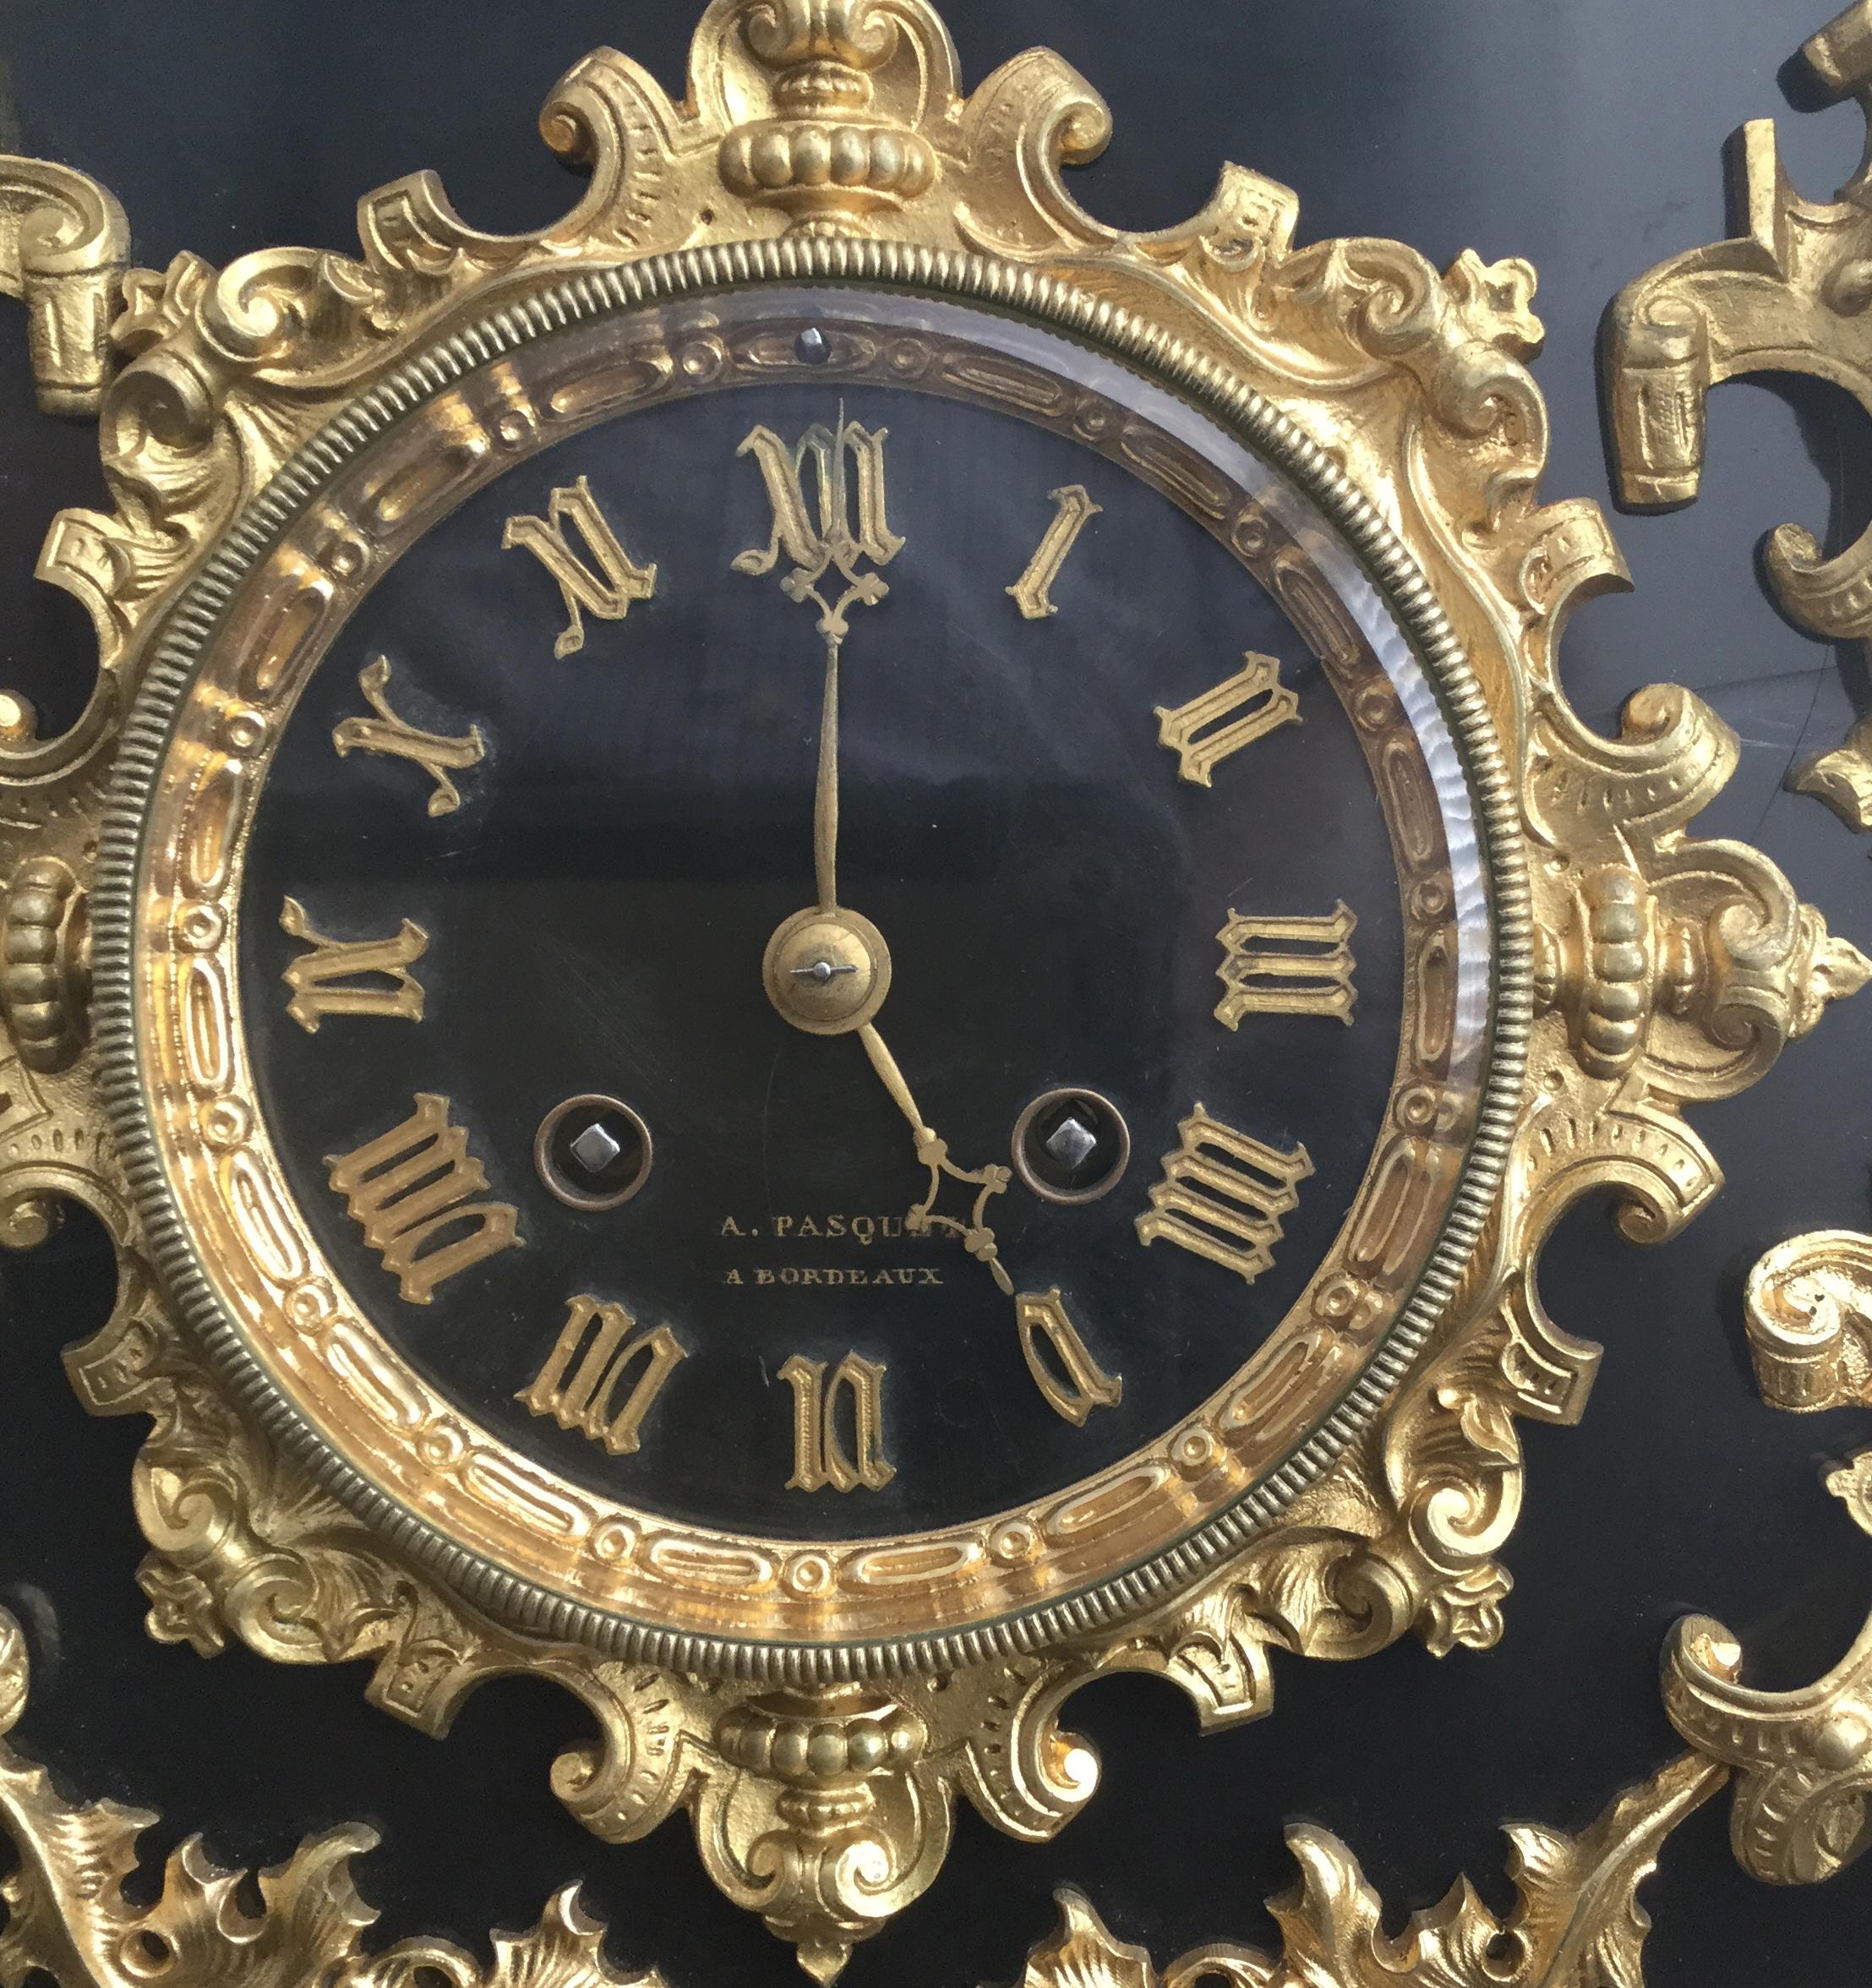 A French early 19th century Gothic style black slate and bronze mantel or library clock of outstanding quality with gilt highlights, the case profusely decorated with swirling leaf and berry patterns, the body highlighted with male and female busts